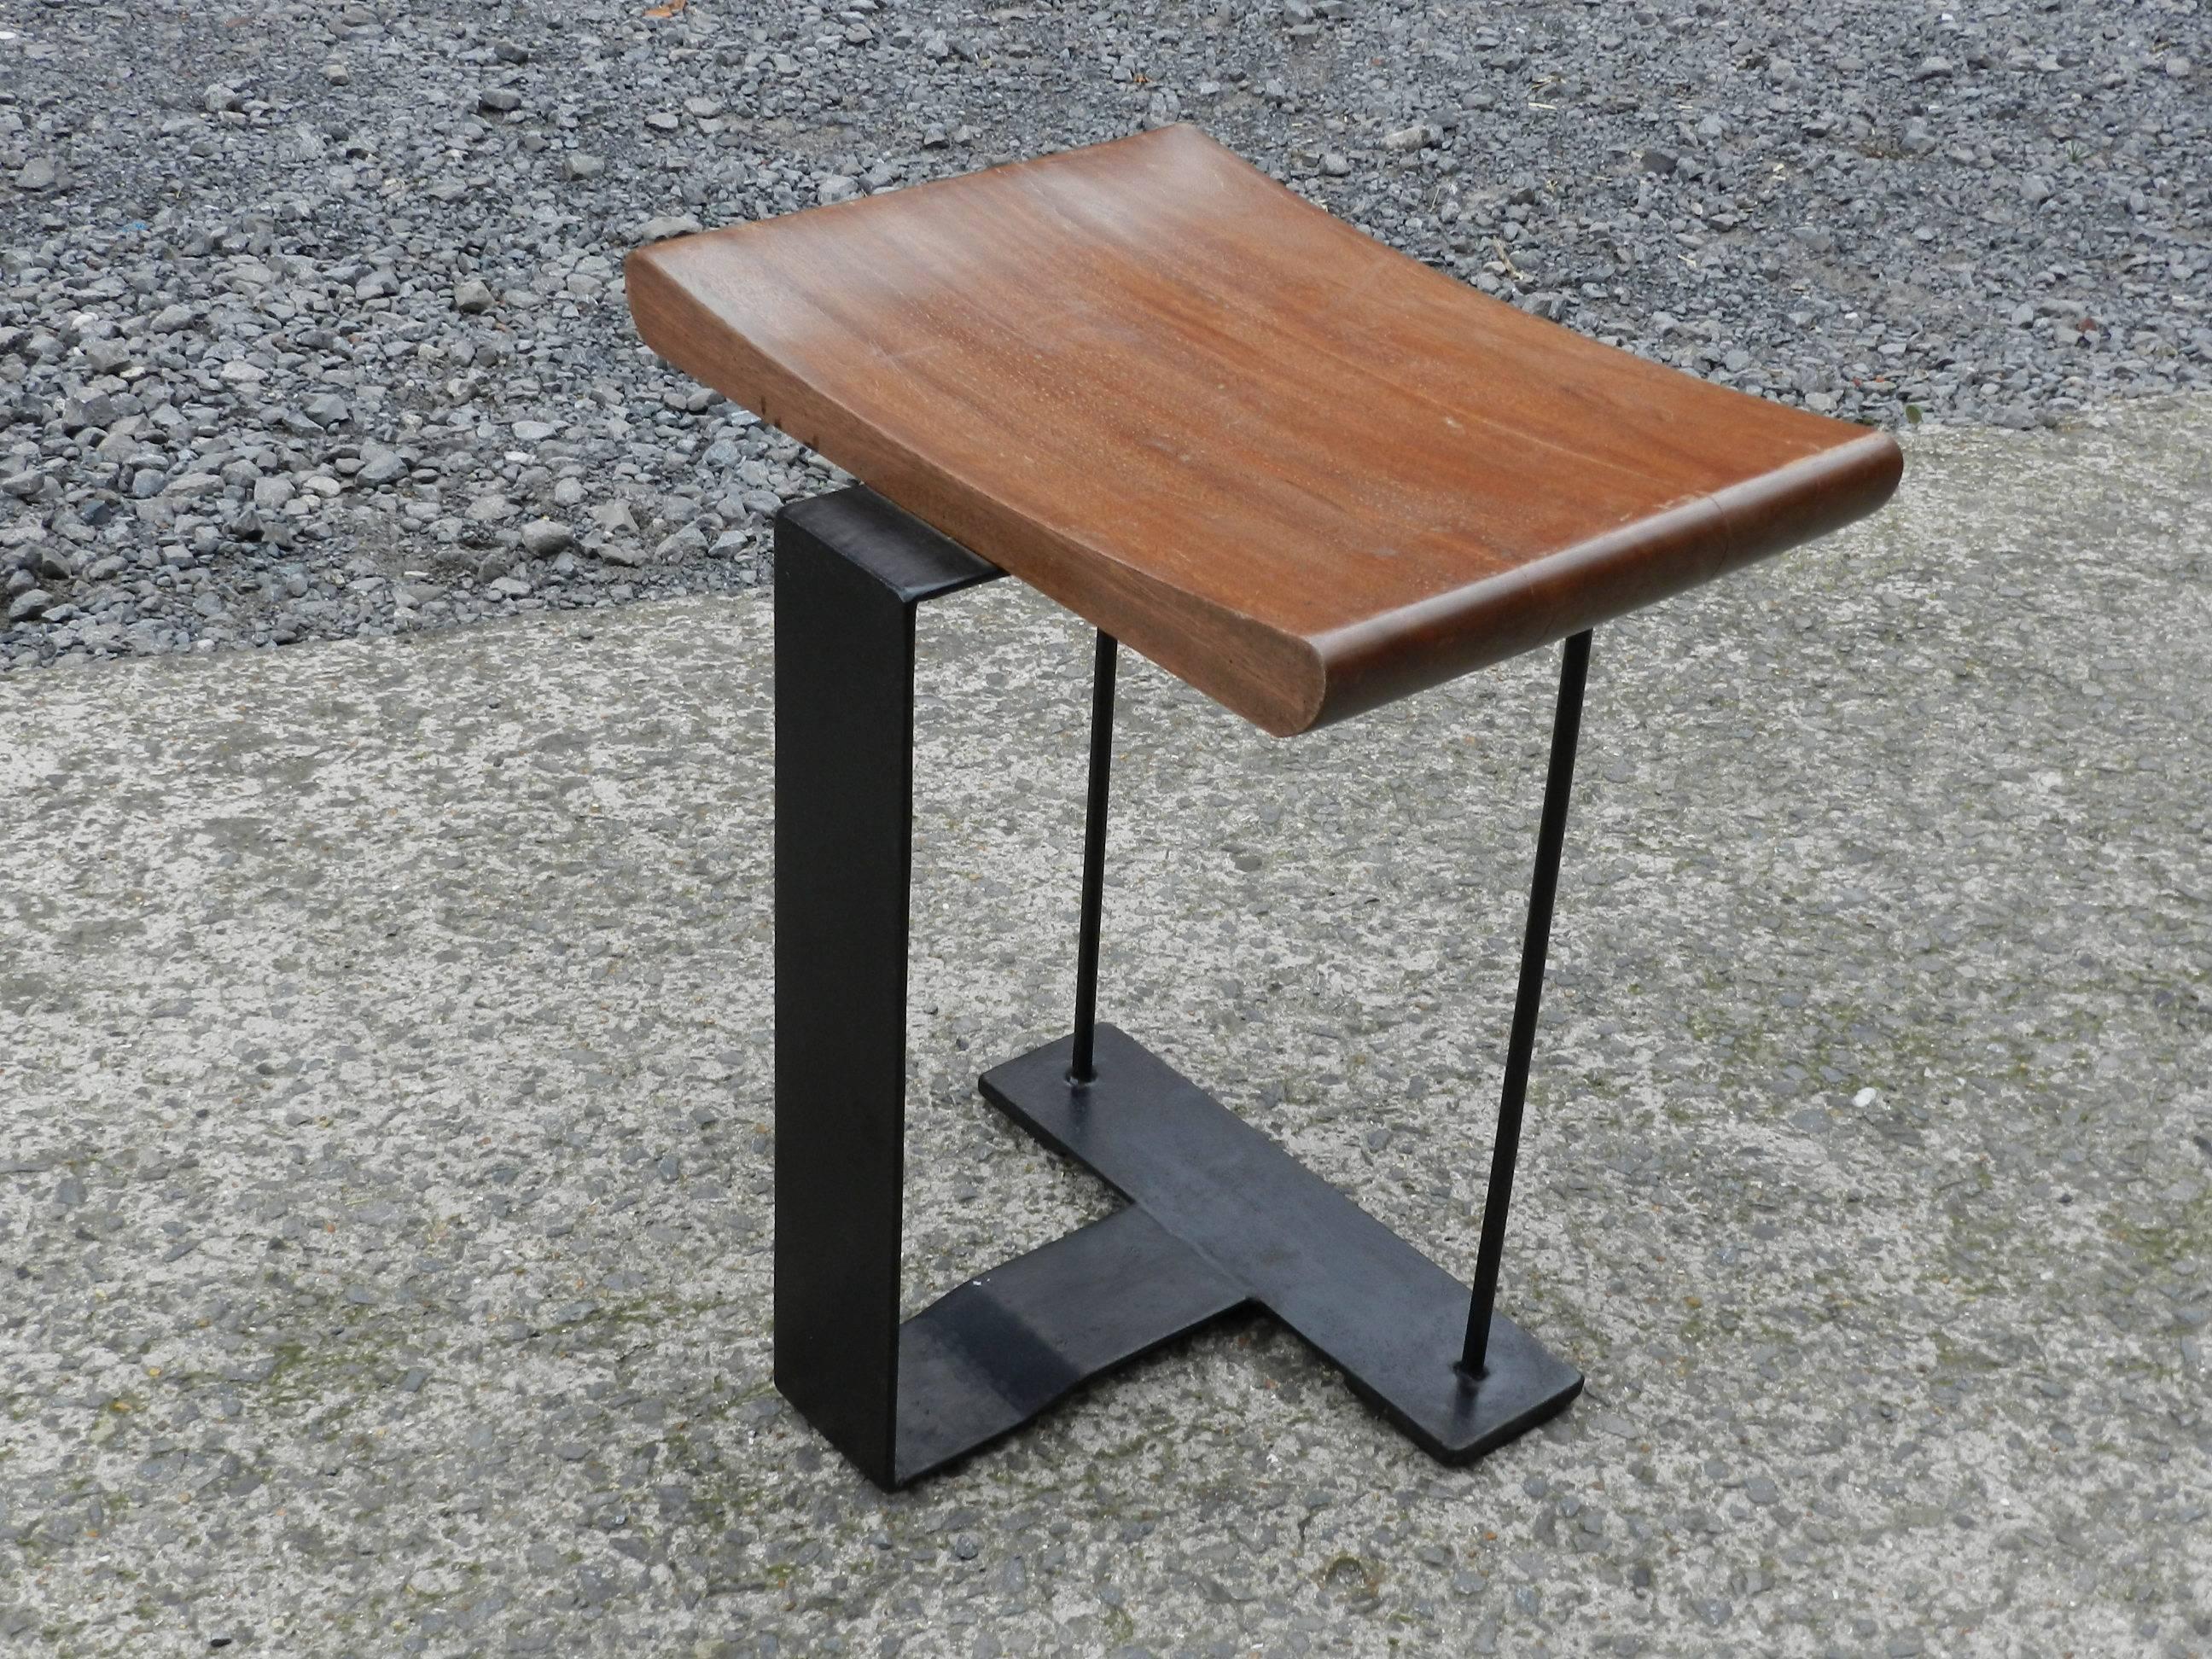 Modernist Art Deco Desk and Its Seat in the Style of Pierre Chareau 1